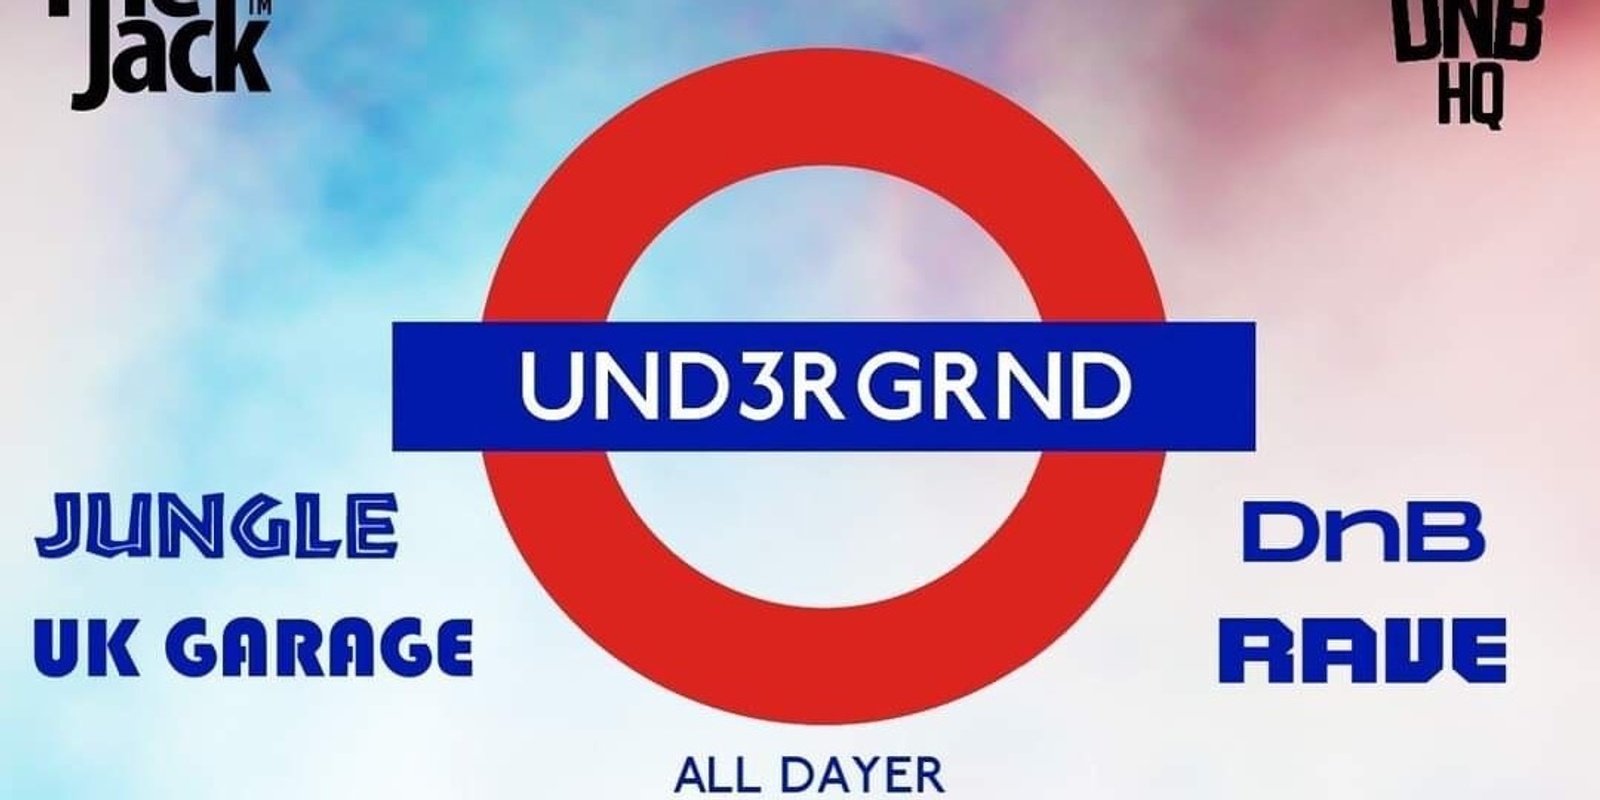 Banner image for UND3RGRND by Cairns Drum & Bass HQ